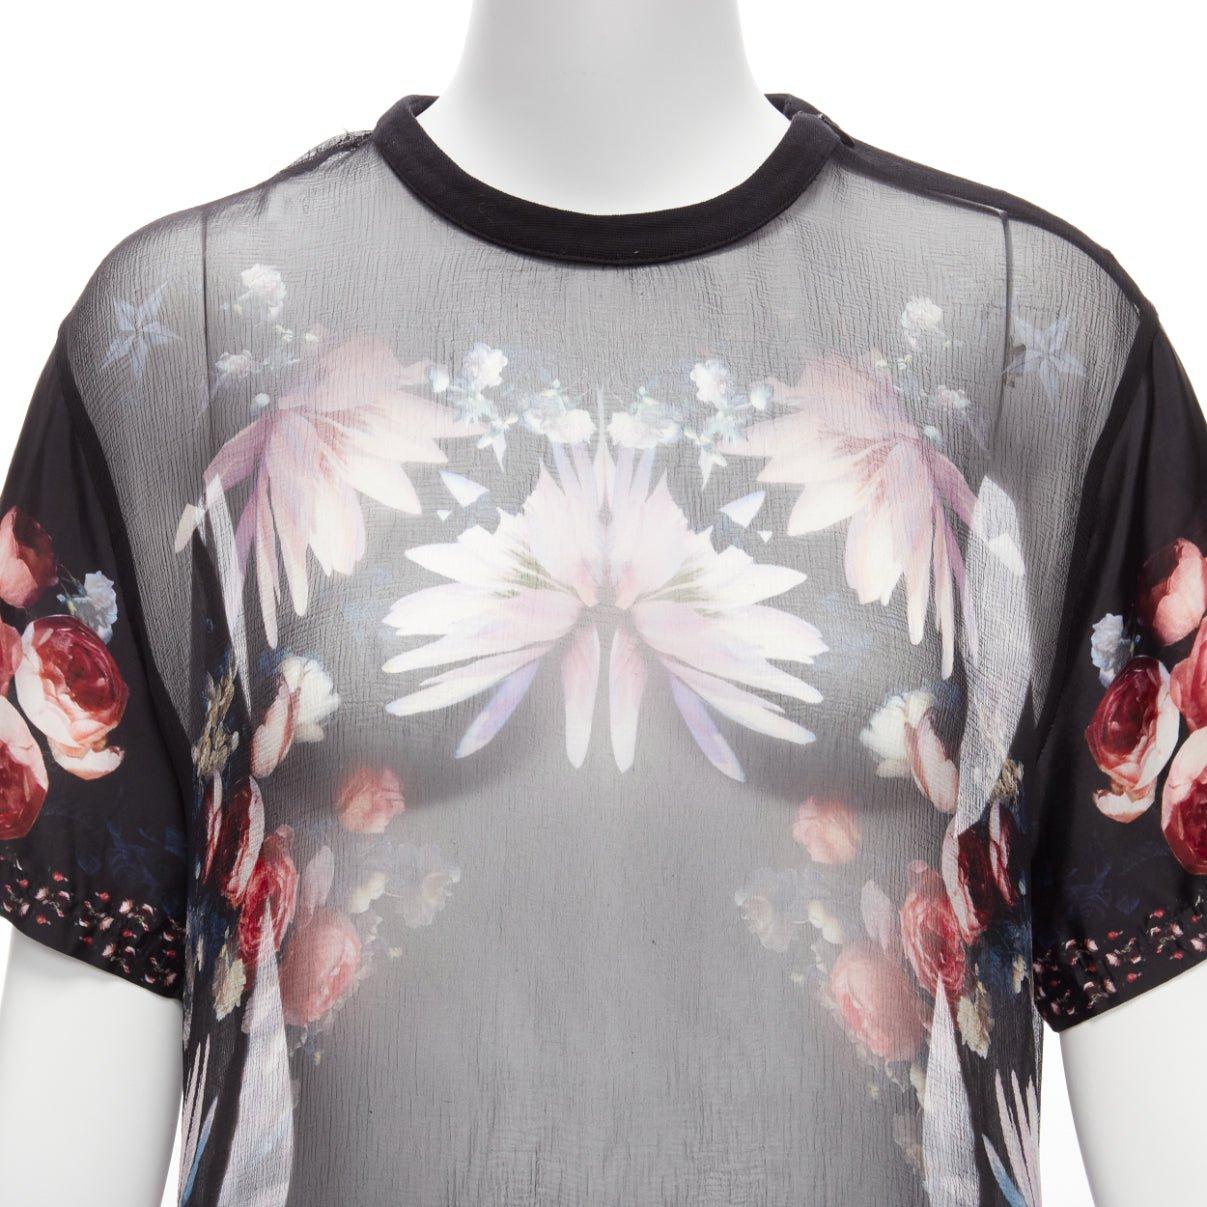 GIVENCHY RICCARDO TISCI red black floral sheer romantic goth tshirt FR34 XS For Sale 2